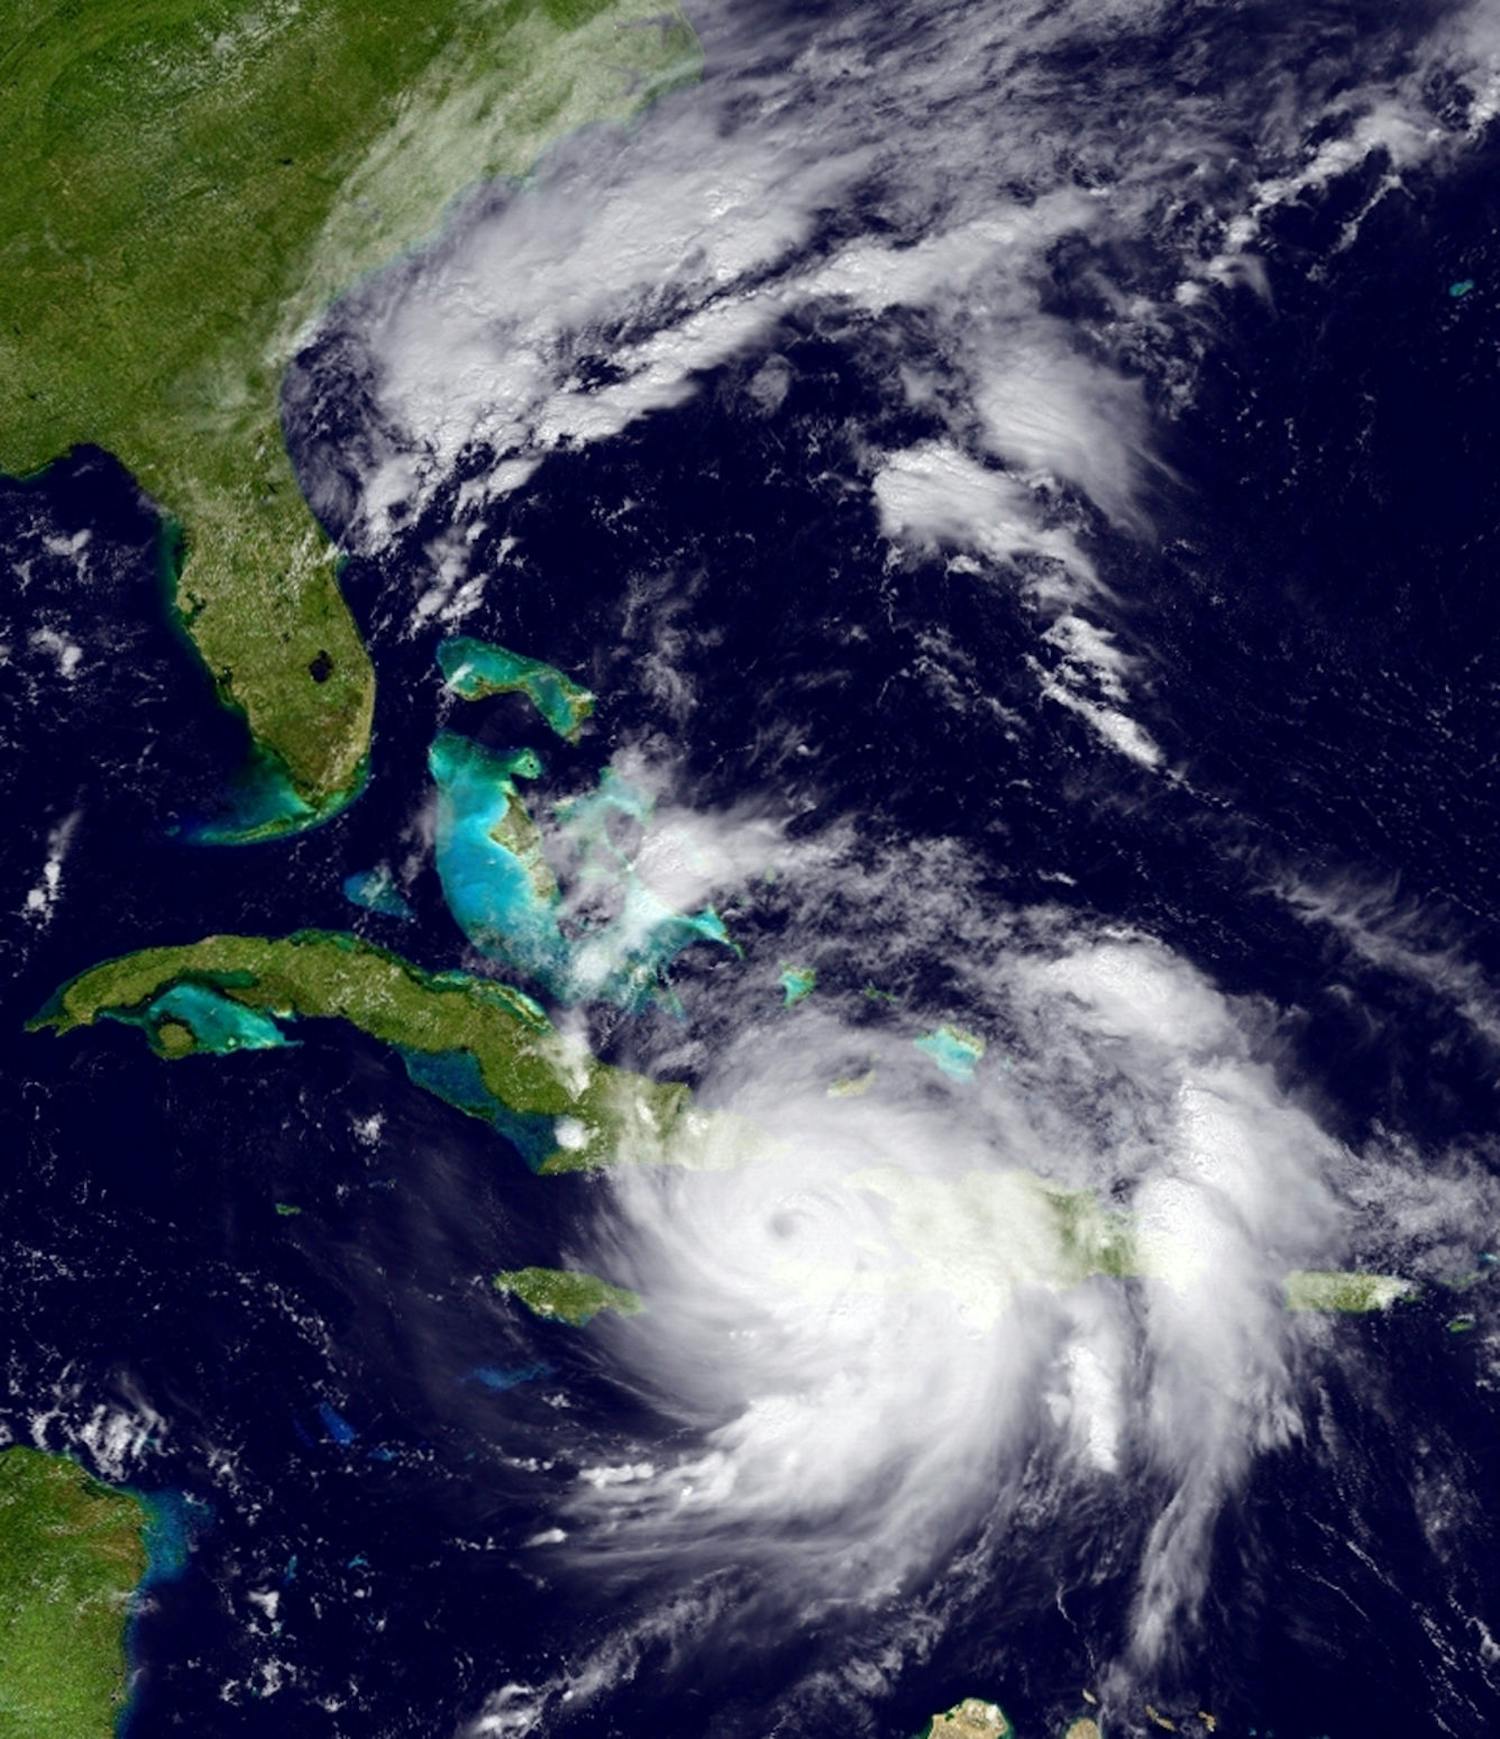 The GOES East satellite image provided by the National Oceanic and Atmospheric Administration (NOAA) and taken Tuesday, Oct. 4, 2016 at 1:12 p.m. EDT, shows Hurricane Matthew over the Caribbean region. Hurricane Matthew roared across the southwestern tip of Haiti with 145 mph winds Tuesday, Oct. 4, 2016, uprooting trees and tearing roofs from homes in a largely rural corner of the impoverished country as the storm headed north toward Cuba and the east coast of Florida.